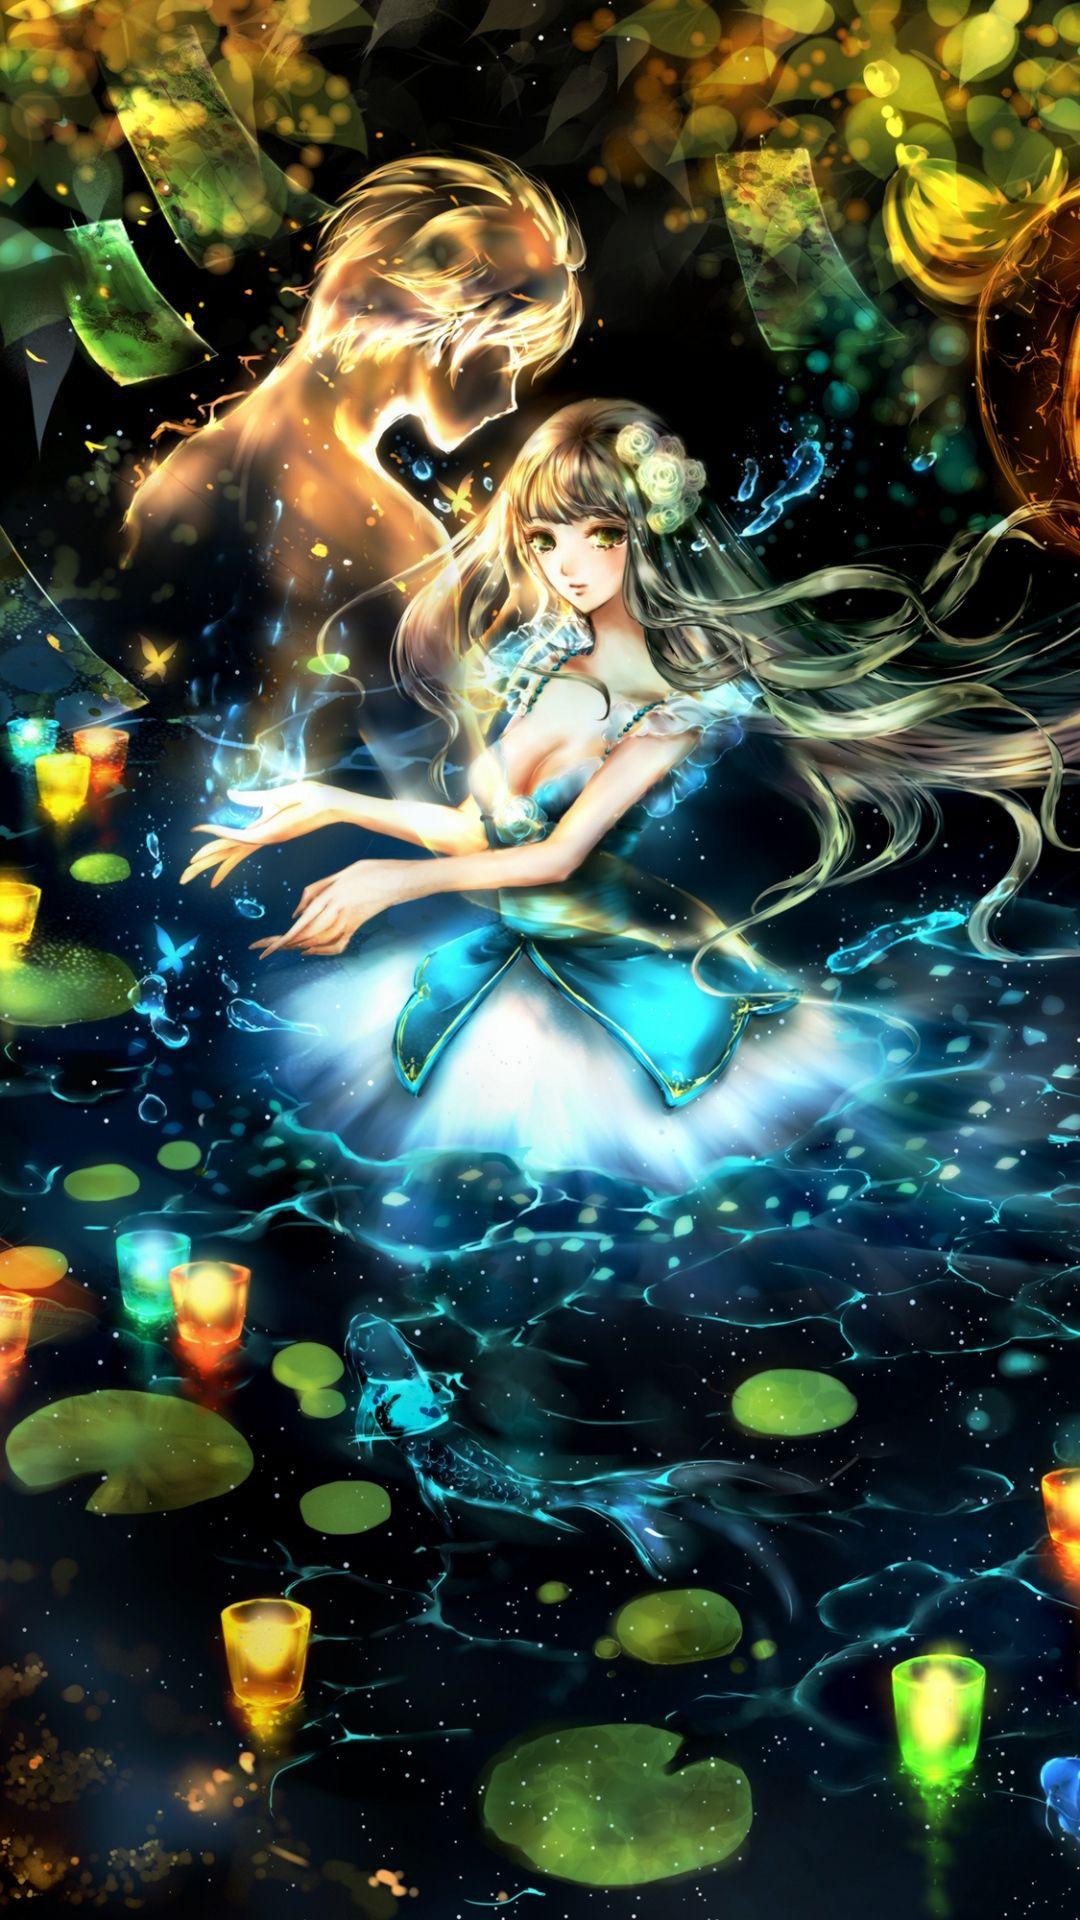 Glowing Anime Wallpapers - Top Free Glowing Anime Backgrounds